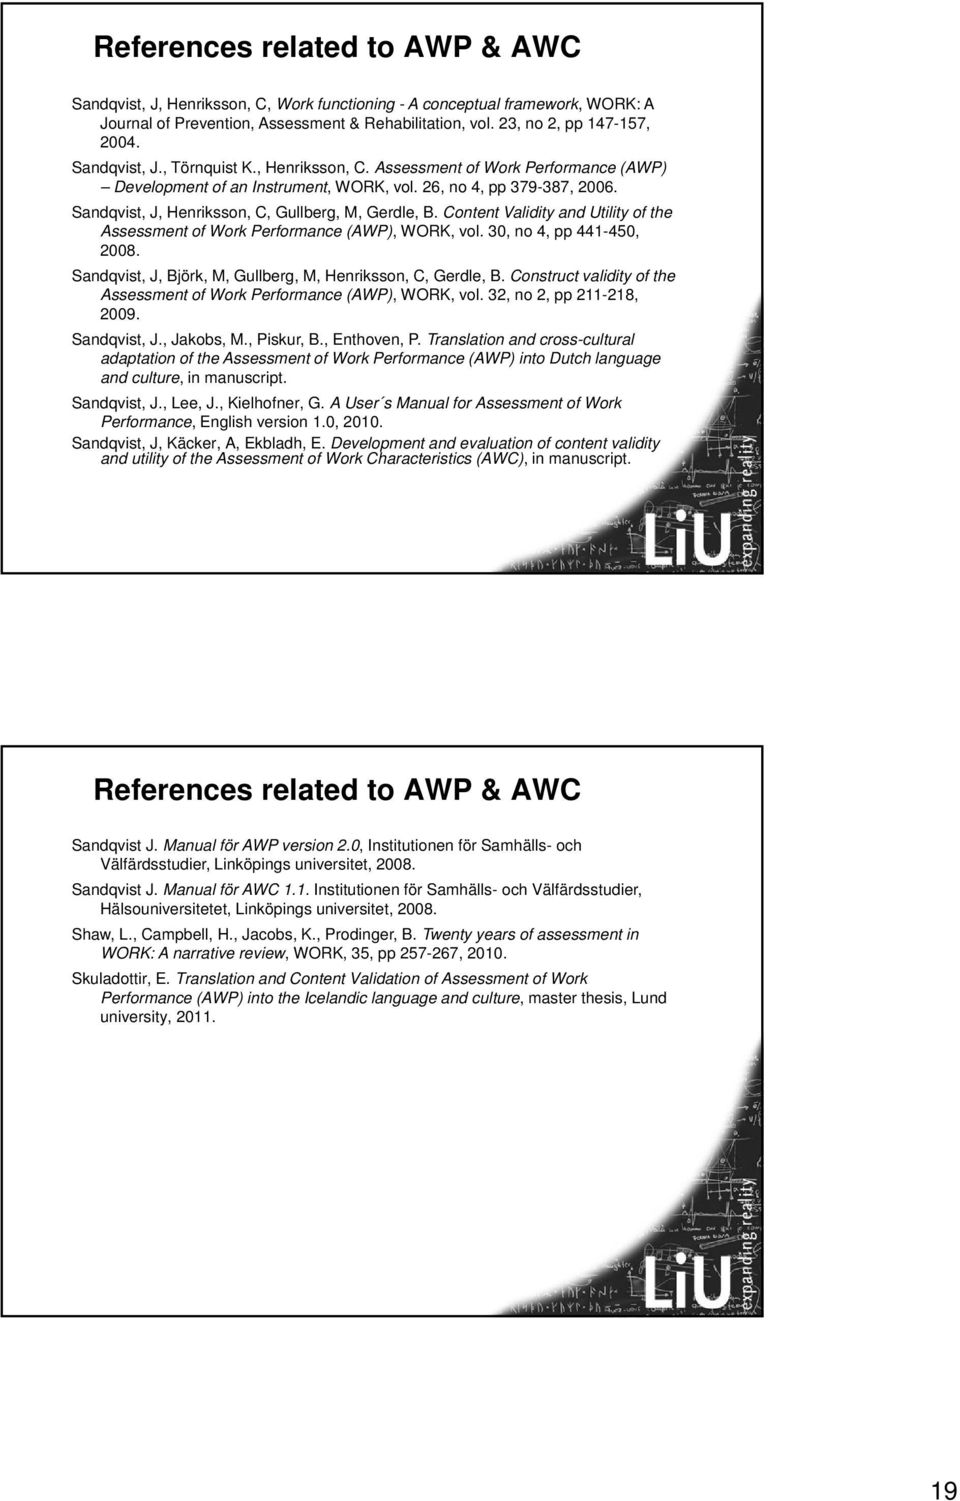 Sandqvist, J, Henriksson, C, Gullberg, M, Gerdle, B. Content Validity and Utility of the Assessment of Work Performance (AWP), WORK, vol. 30, no 4, pp 441-450, 2008.